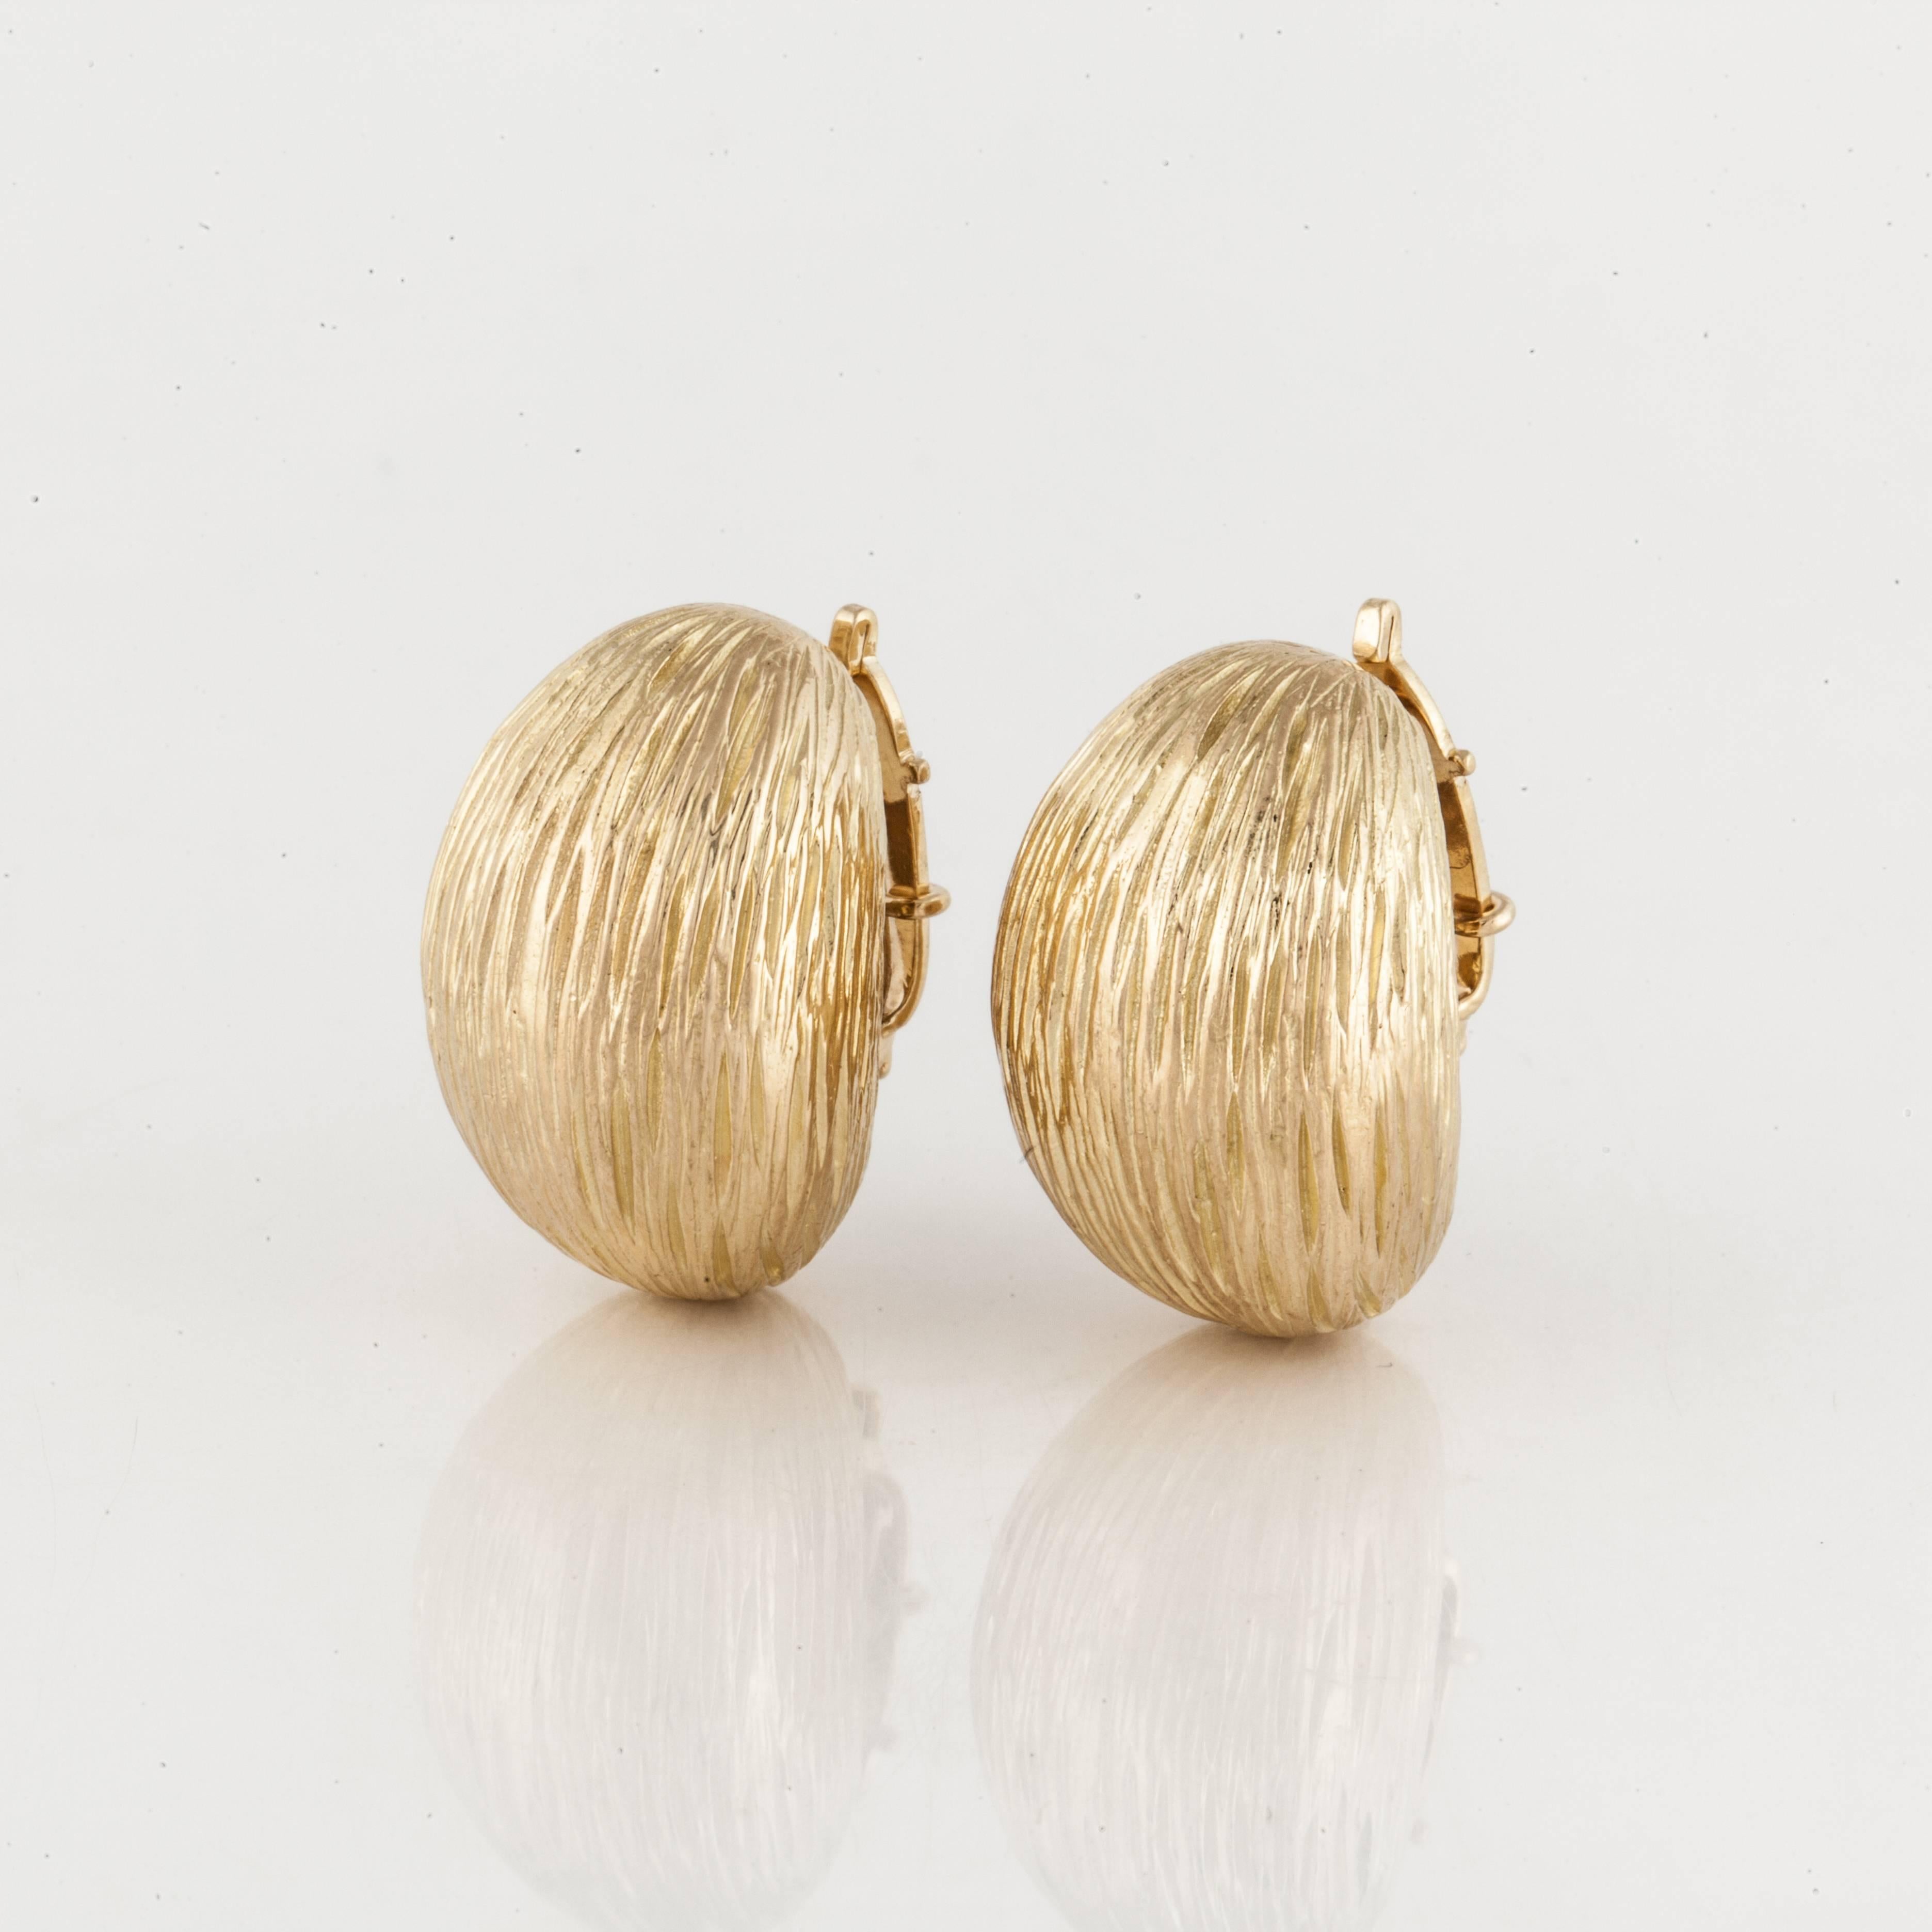 Tiffany & Co. textured 18K yellow gold earrings.  Marked 